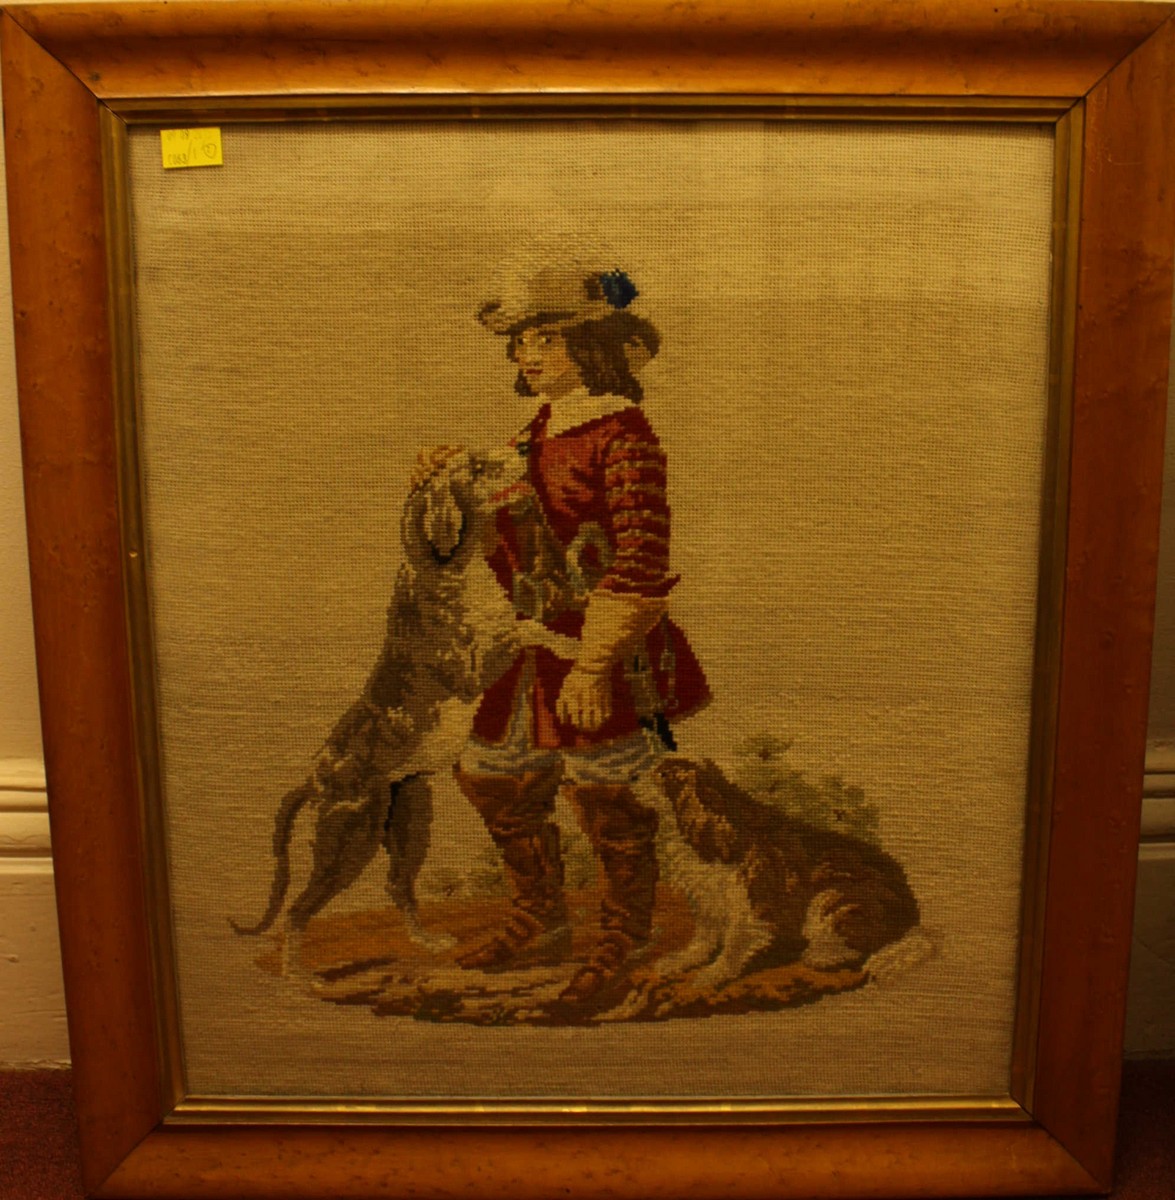 Two 19th century woolwork embroidered pictures of a huntsman, one with dogs, in birds eye maple - Image 2 of 2